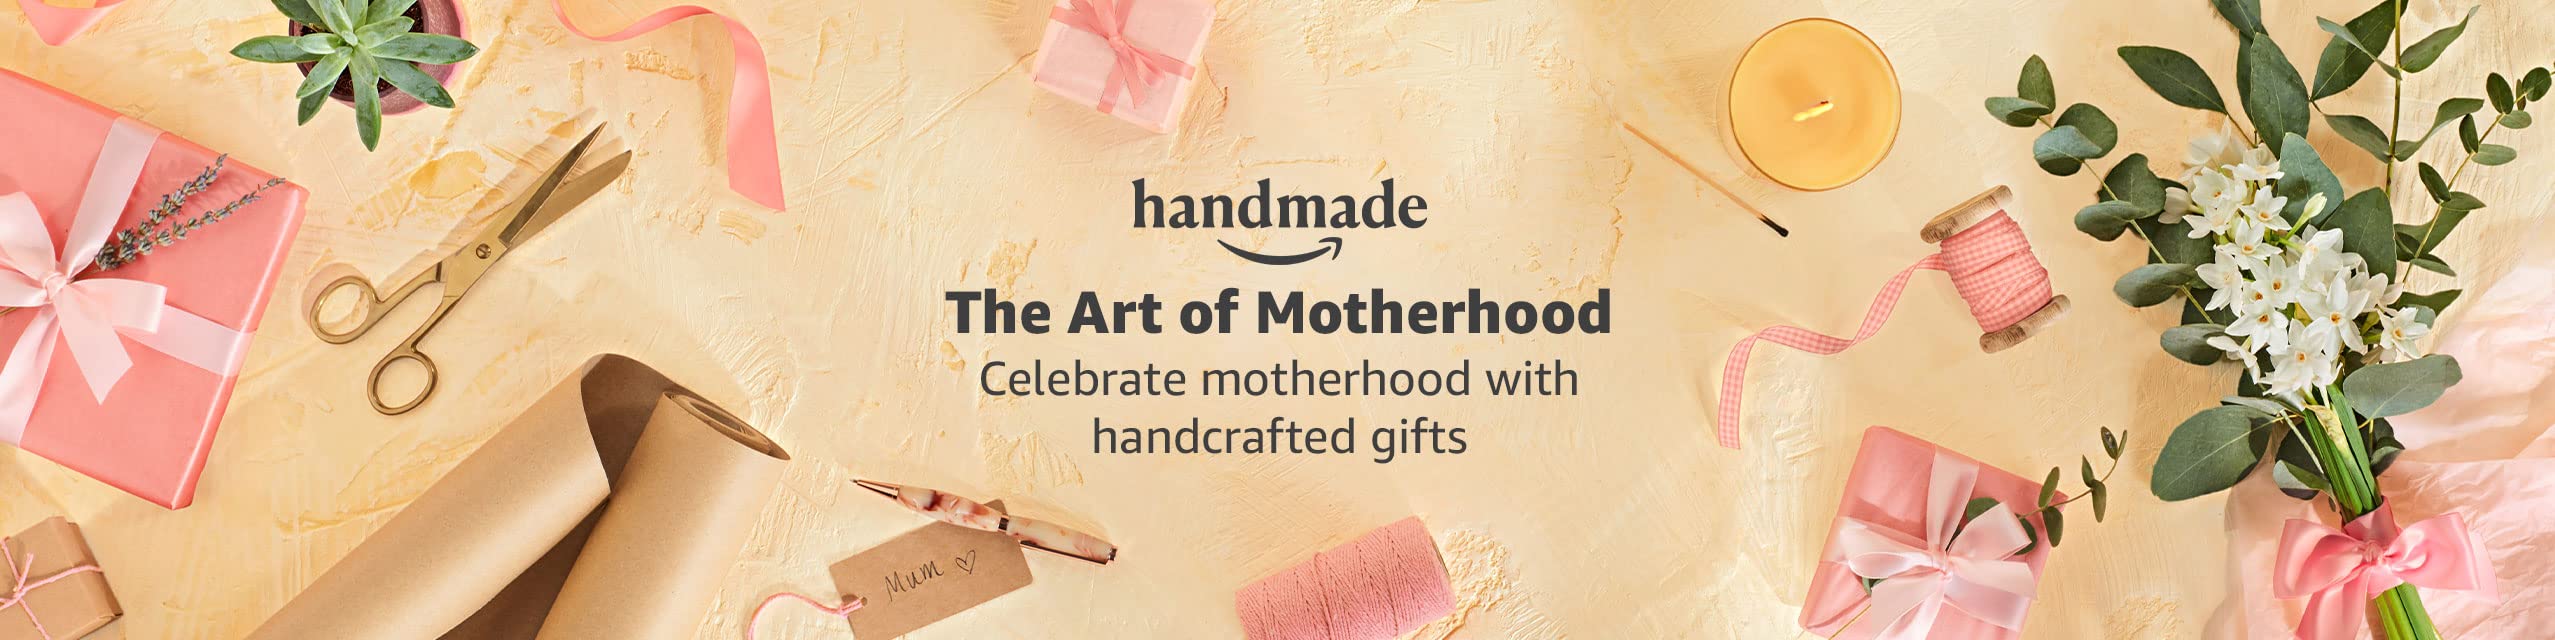 Send Mother's Day Gifts Online to India from Anywhere